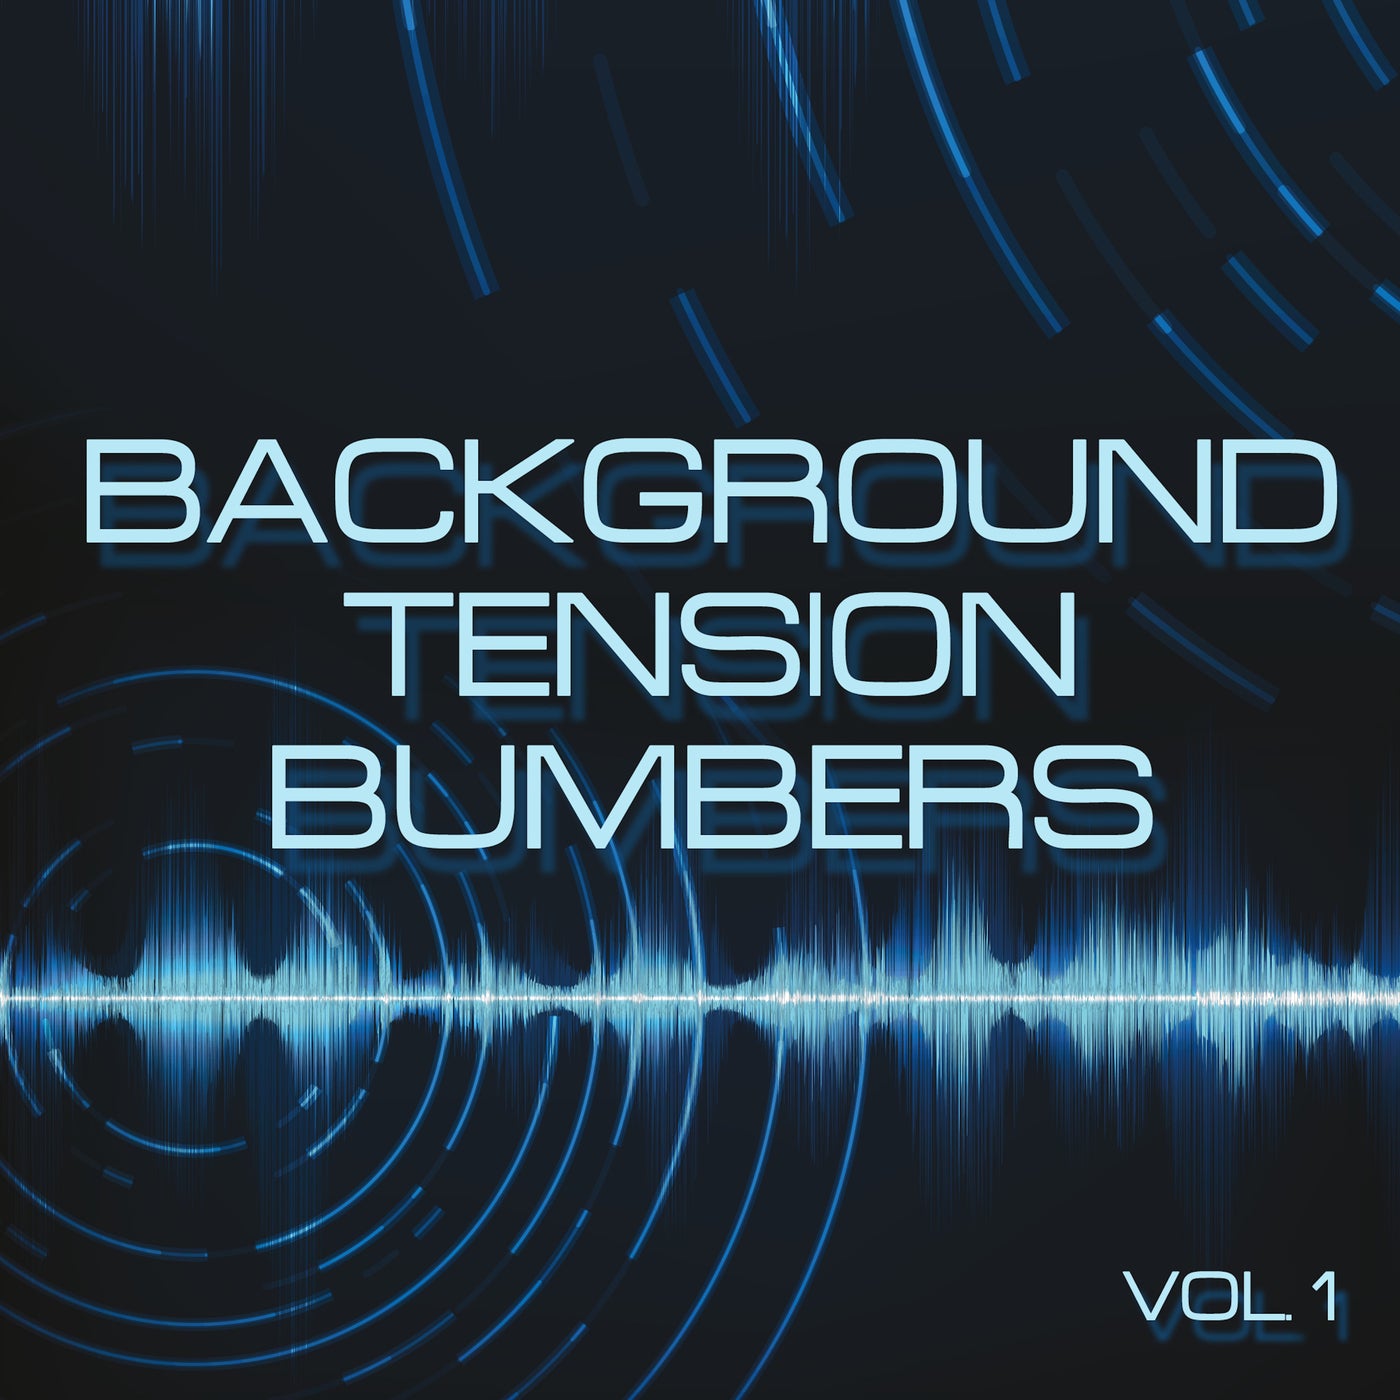 Background Tension Bumpers, Vol. 1